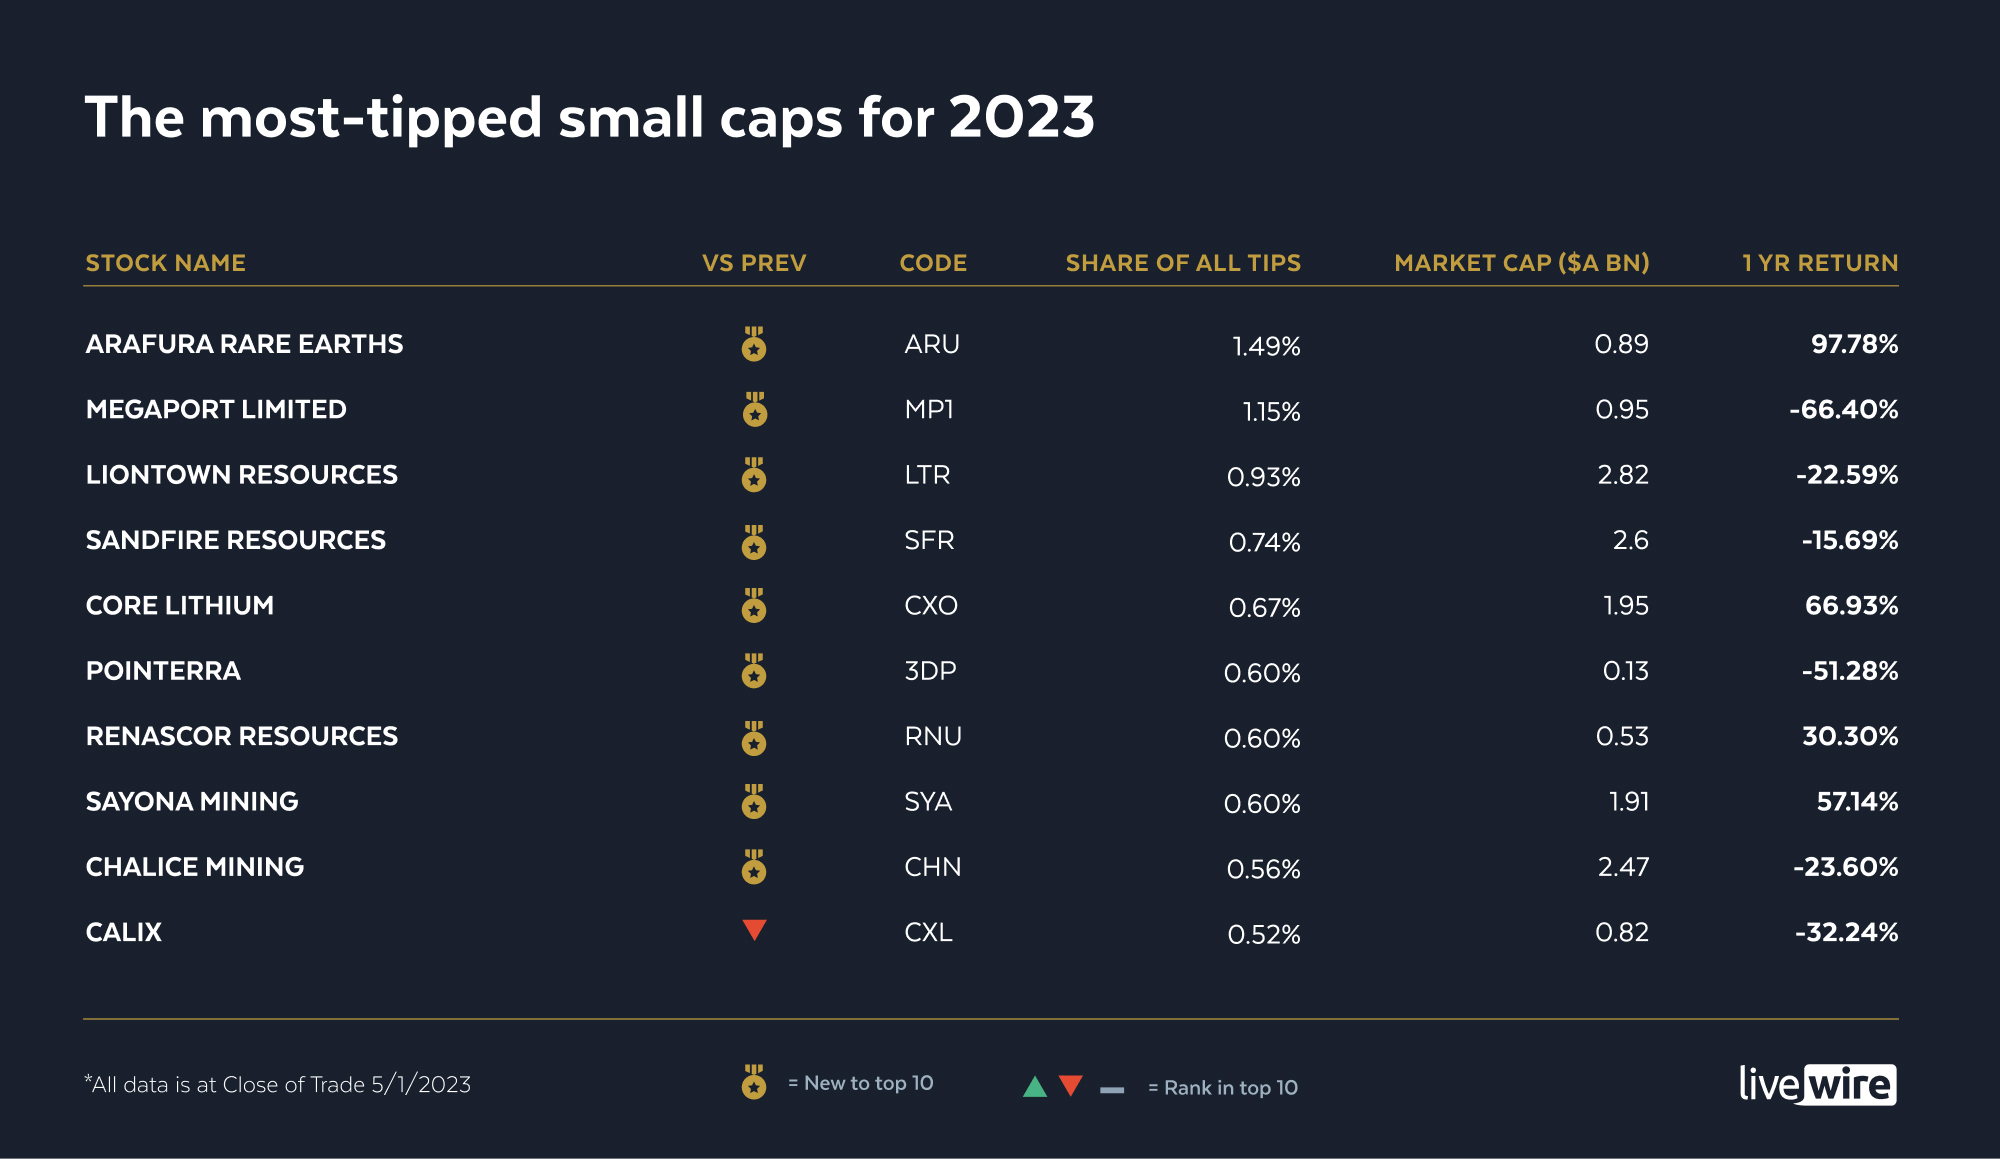 Livewire readers' Top-tipped Small-caps for 2023